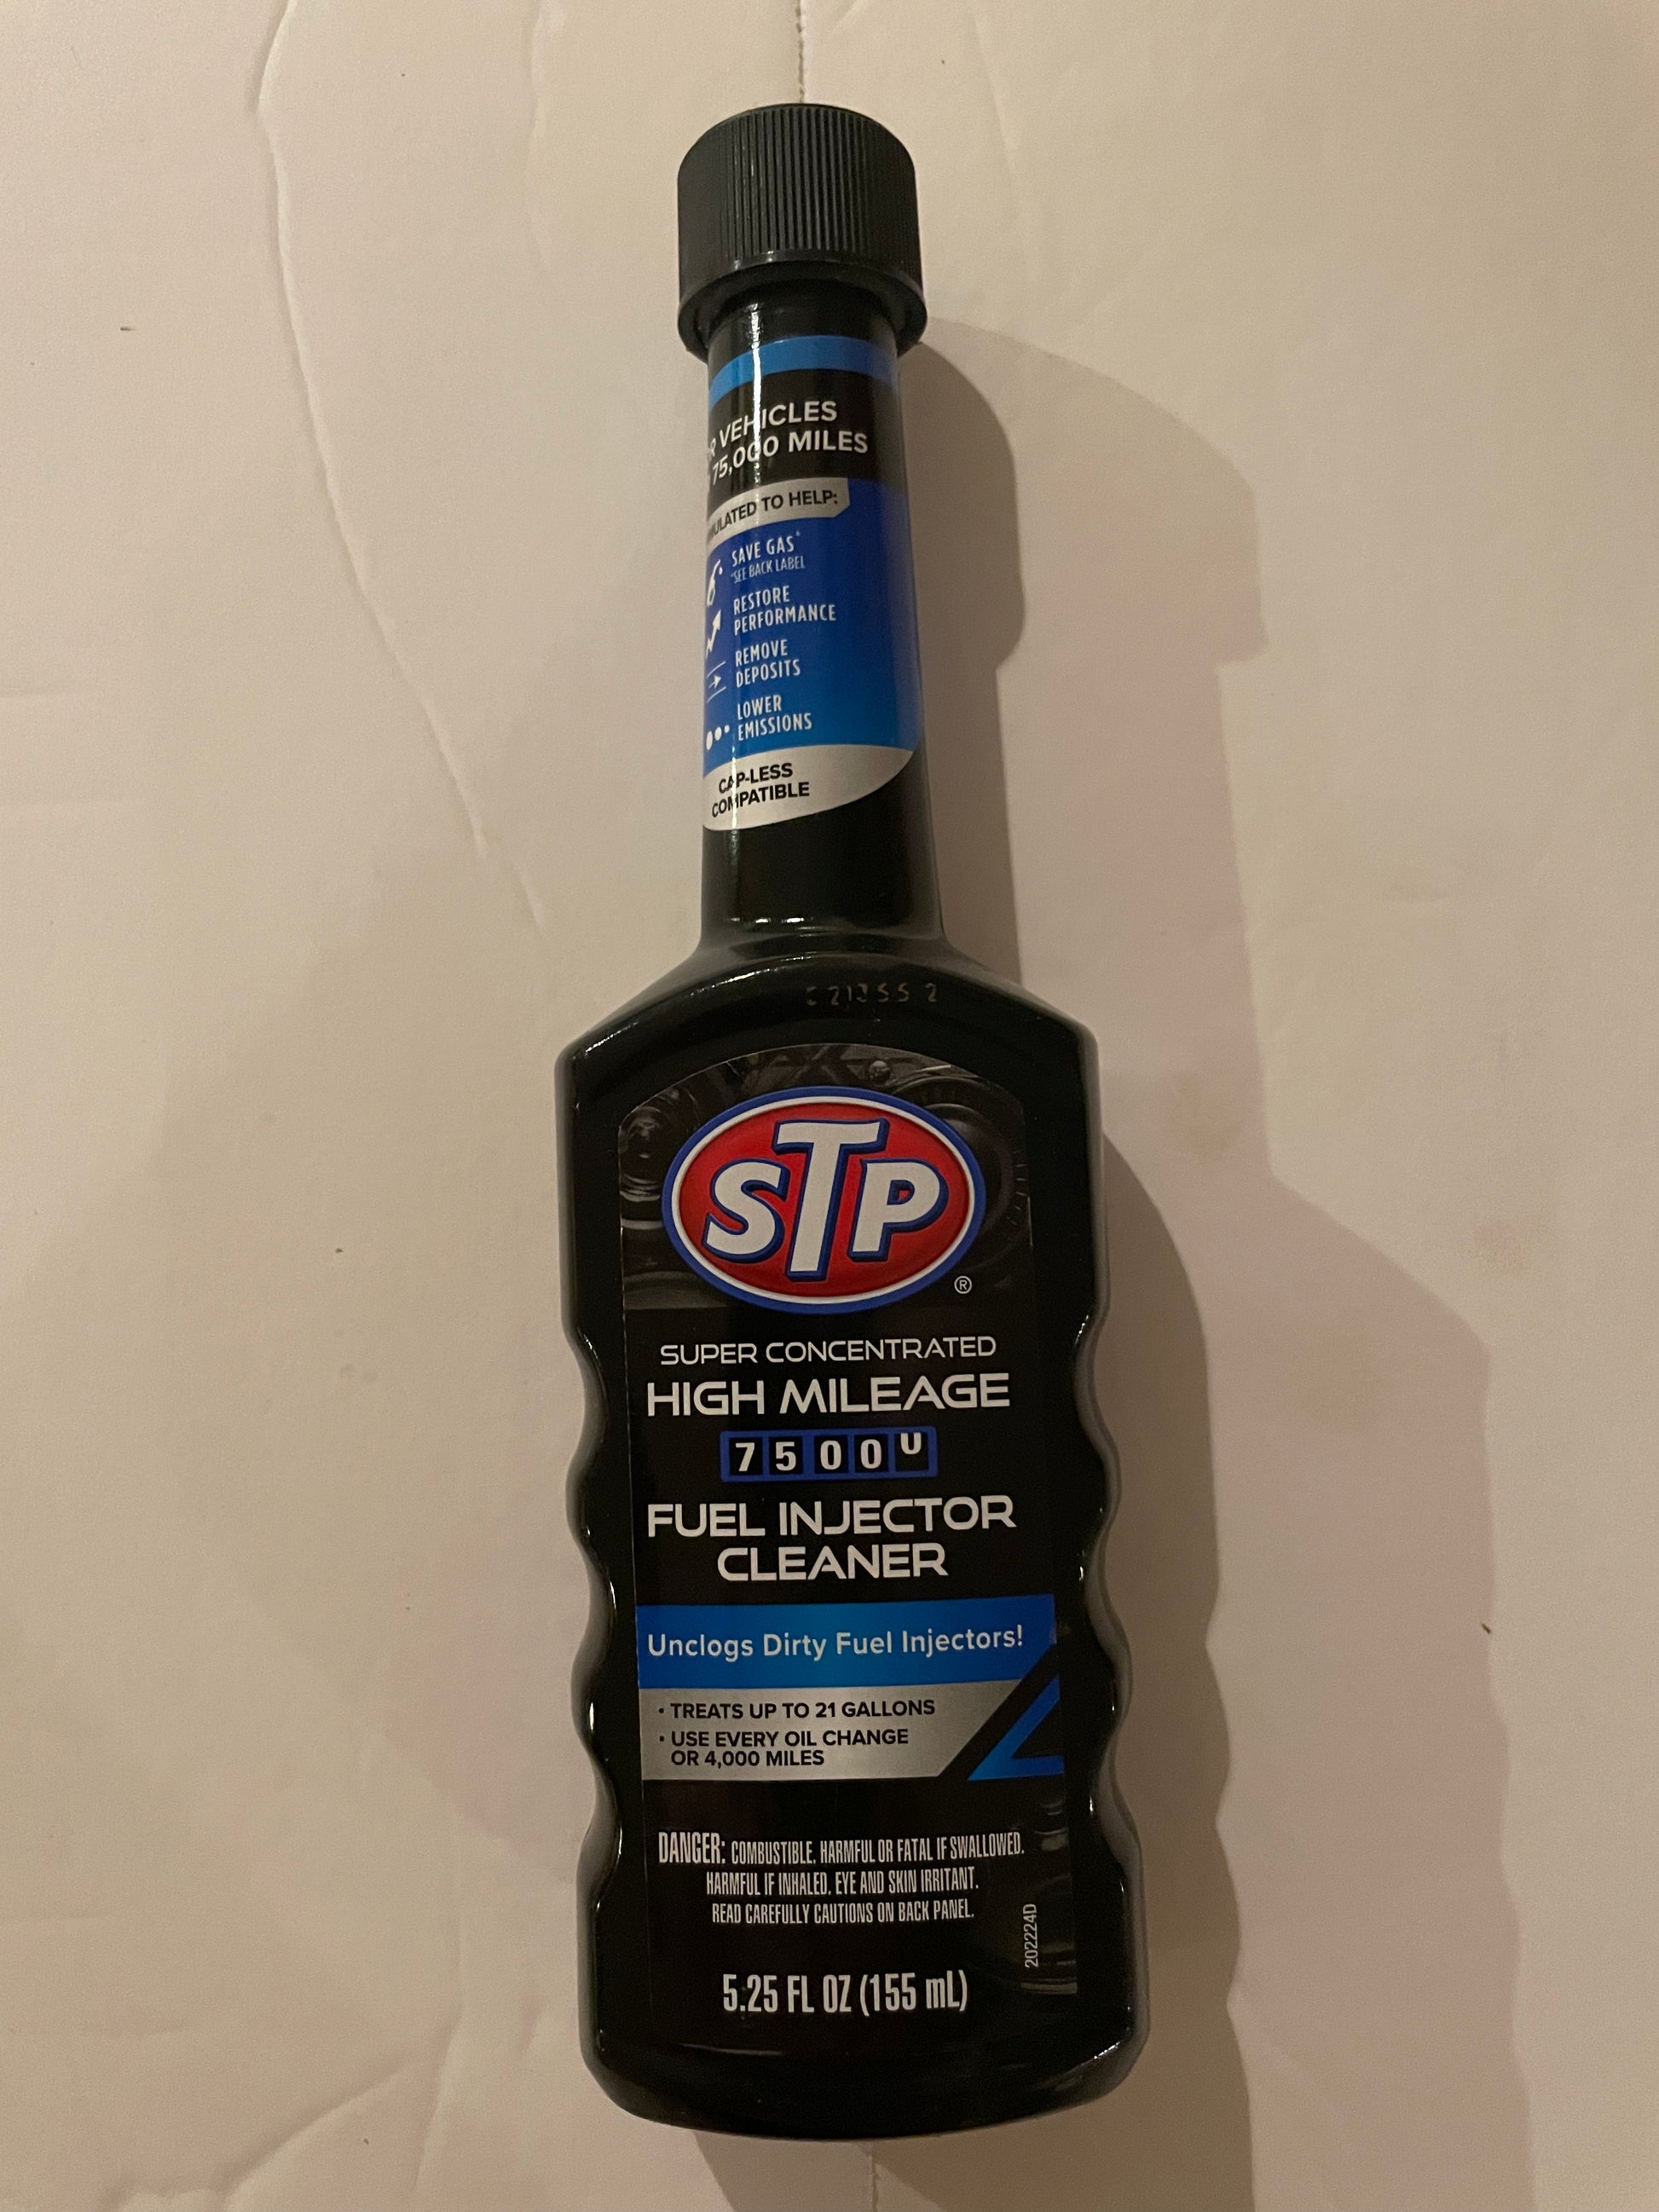 Mile High Cleaner Review